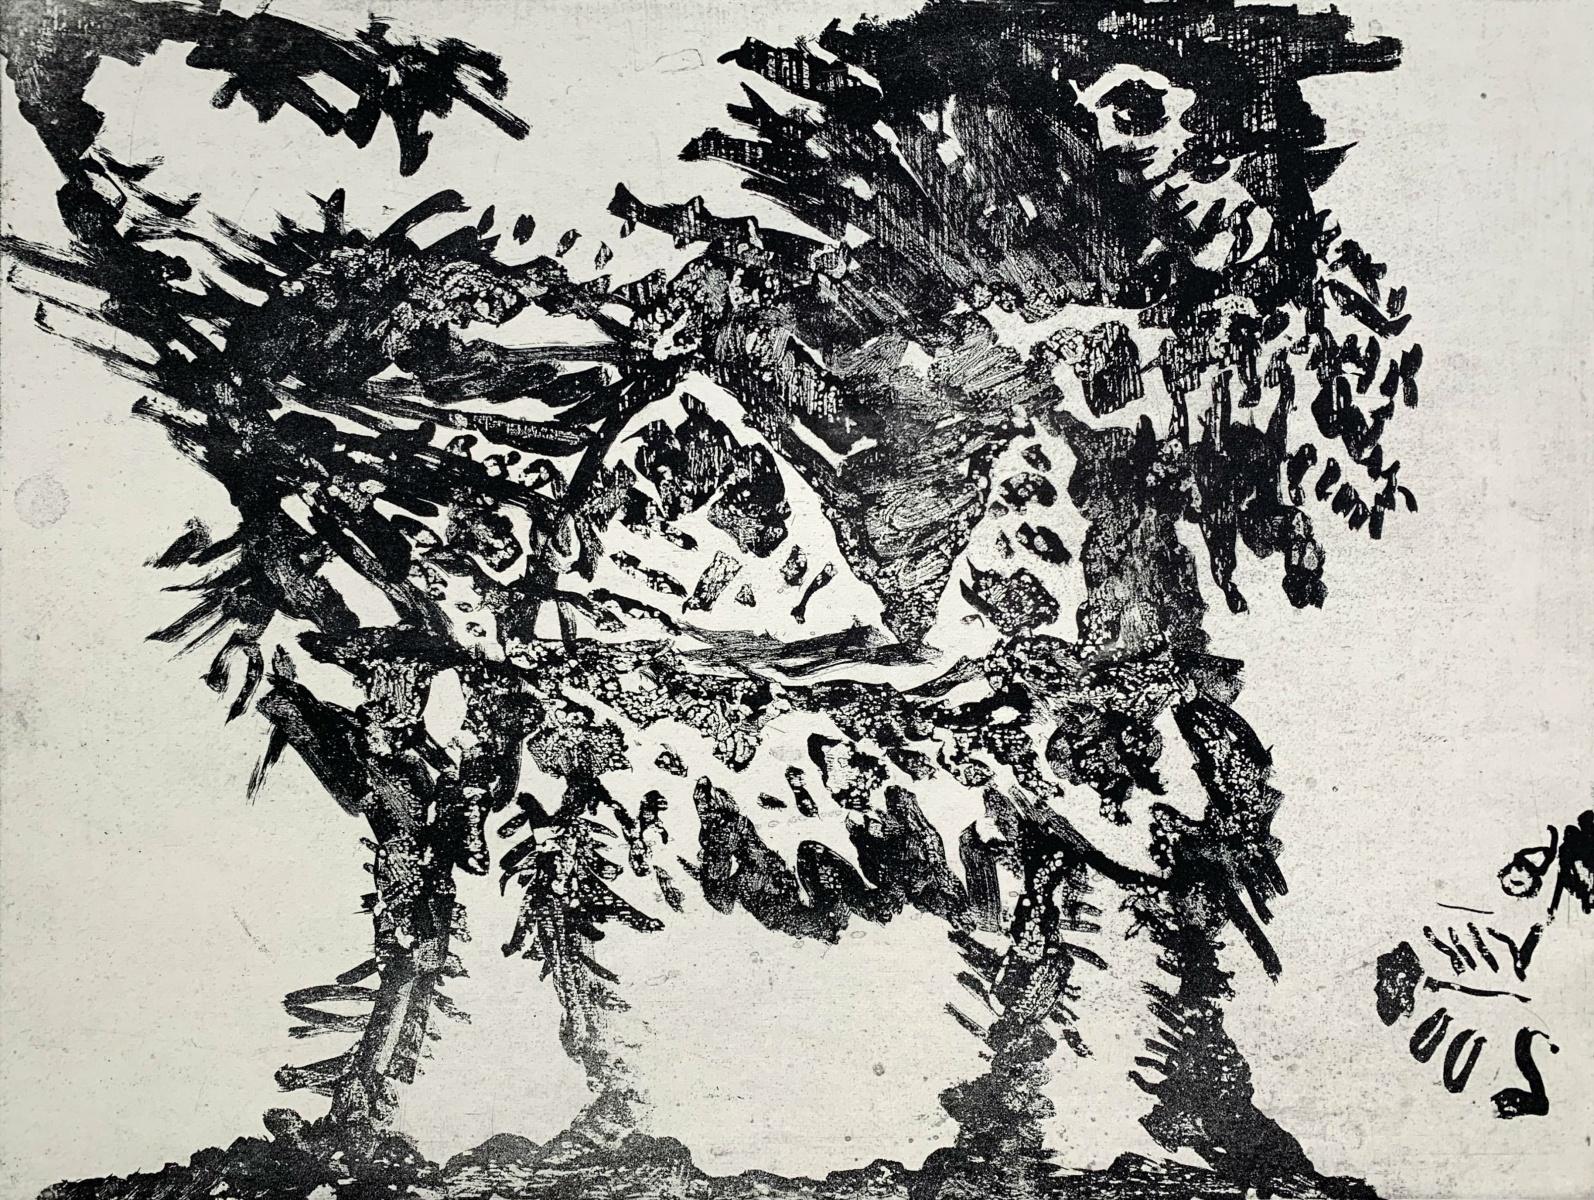 Lion and wind - Black & white etching print, Abstraction, Polish art master